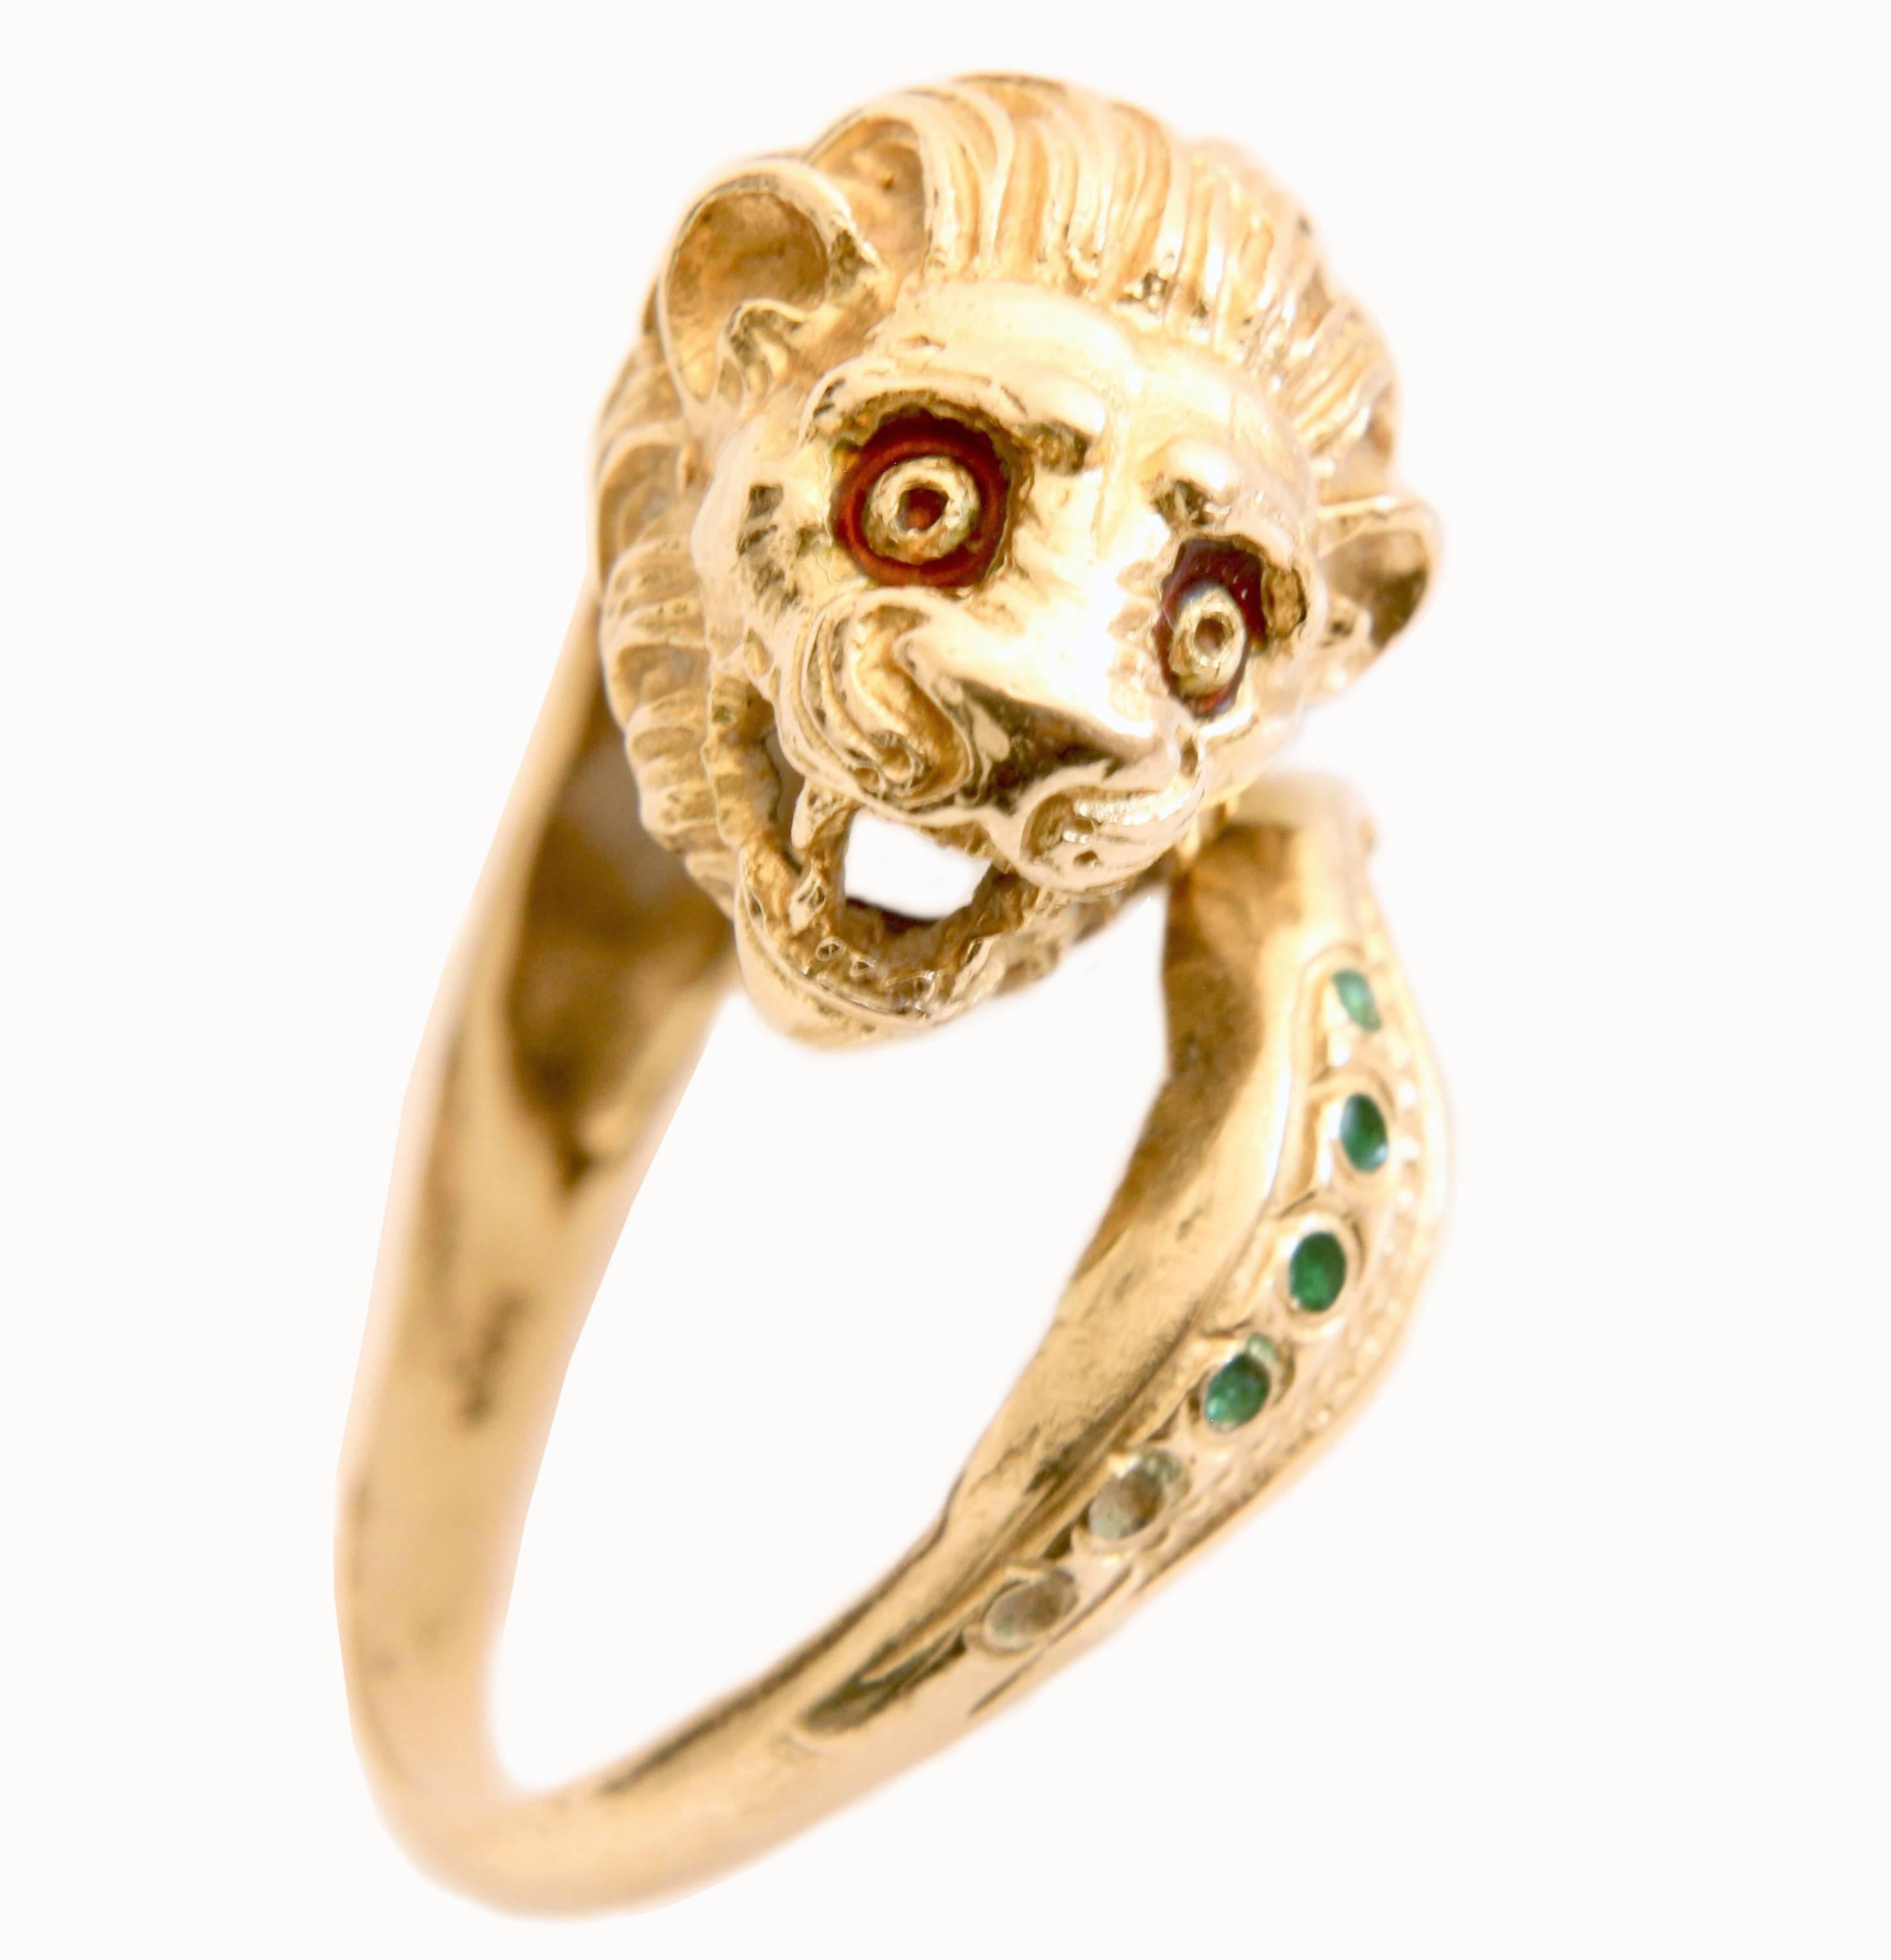 Here's a cool vintage lion head ring, most likely made in the 1960s.  Made from 18 carat gold, this eye-catching piece features emerald green enamel accents as the mane and tail, with red enamel surrounding the eyes.  

Perfect for the Leo in your